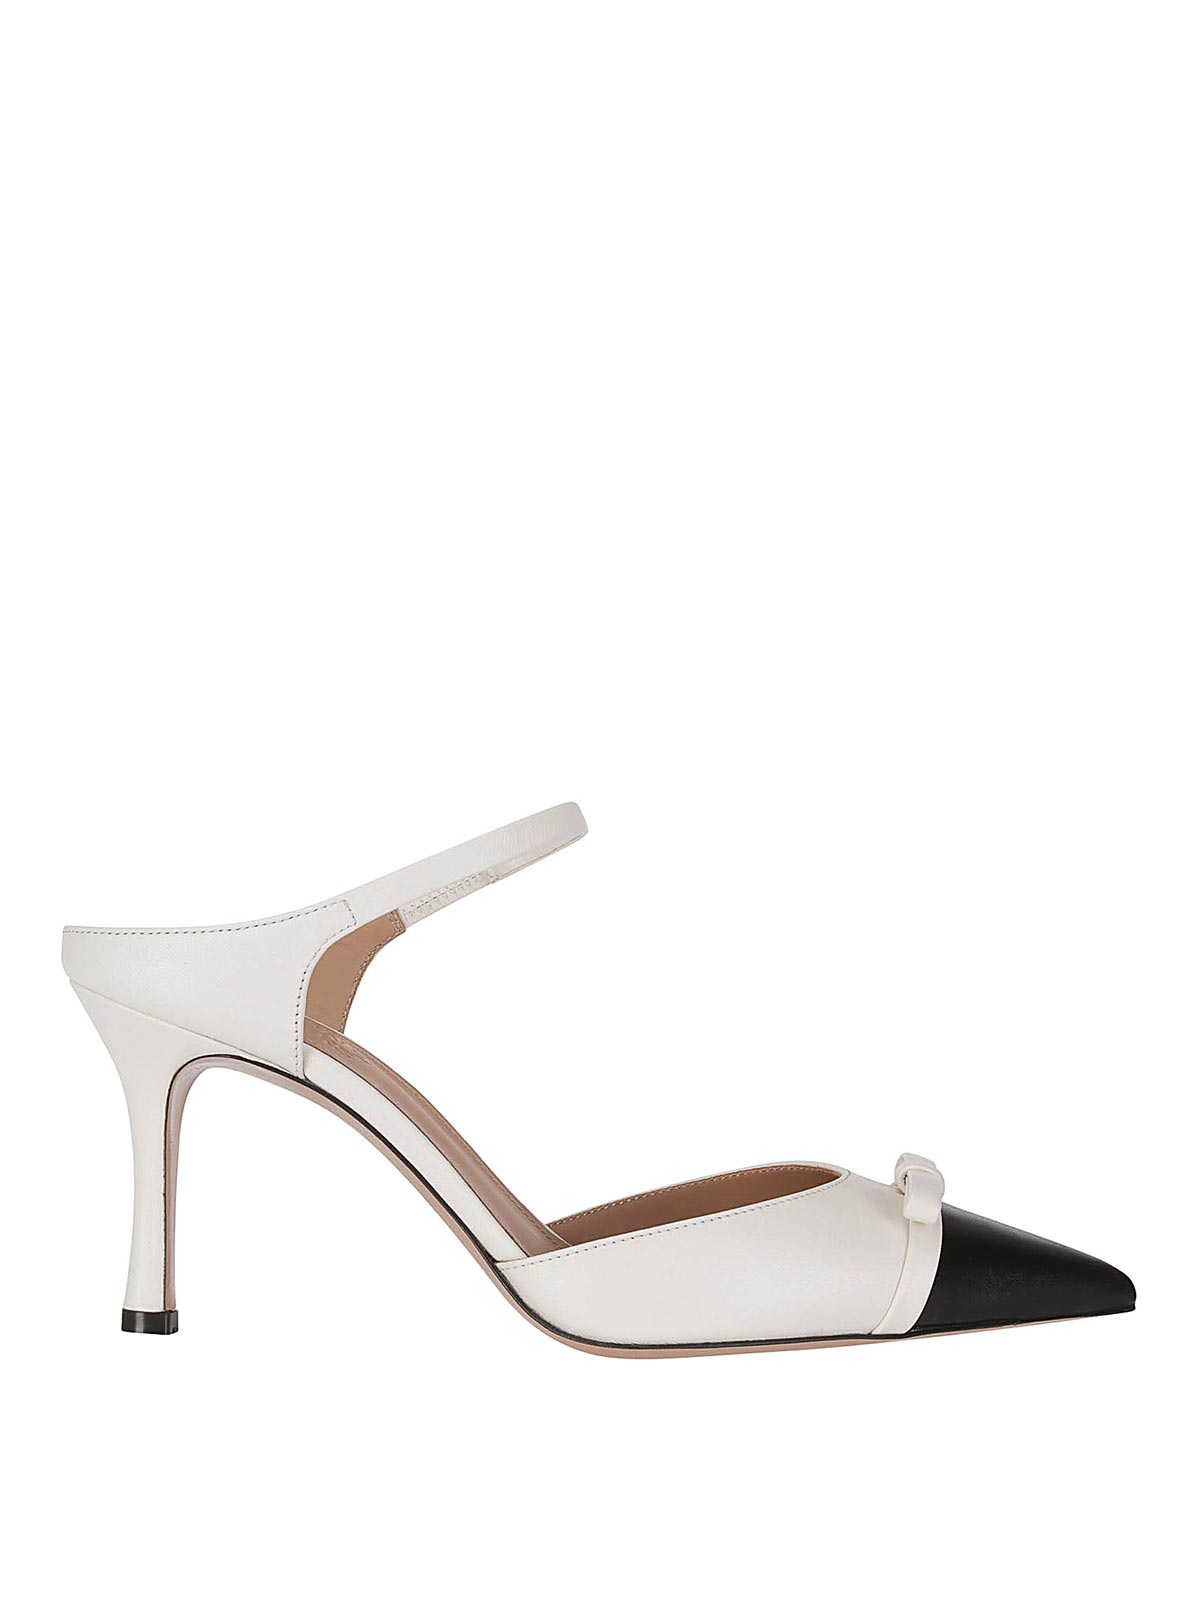 MALONE SOULIERS COURT SHOES